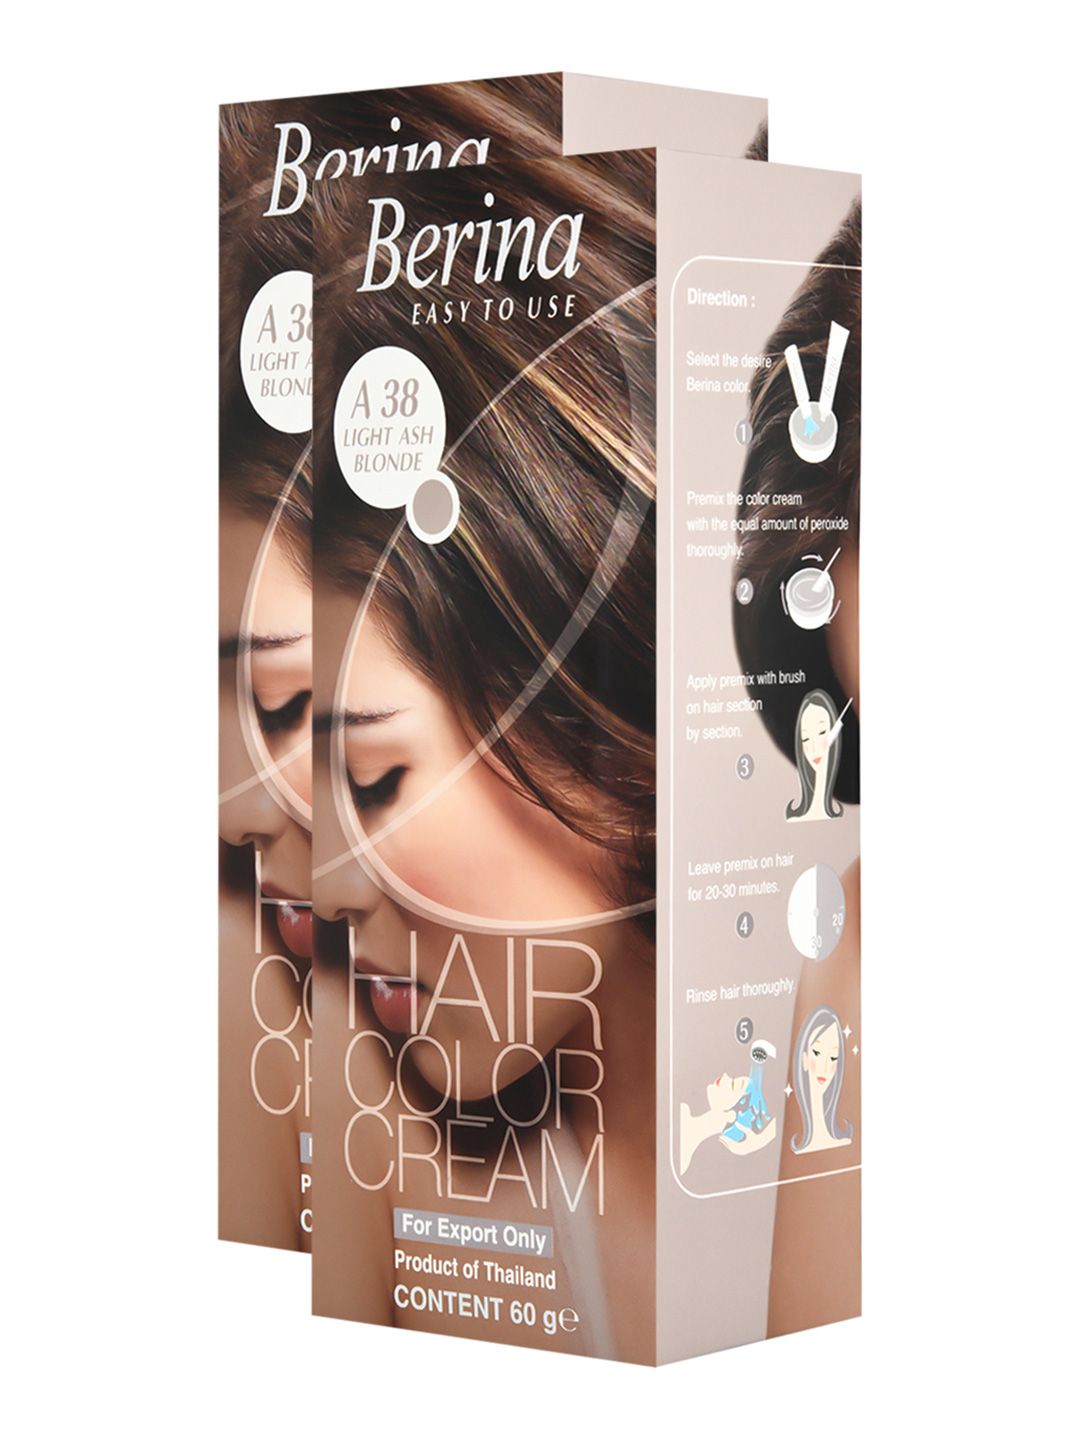 Berina Pack of 2 Hair Color Cream A38 Light Ash Blonde Price in India